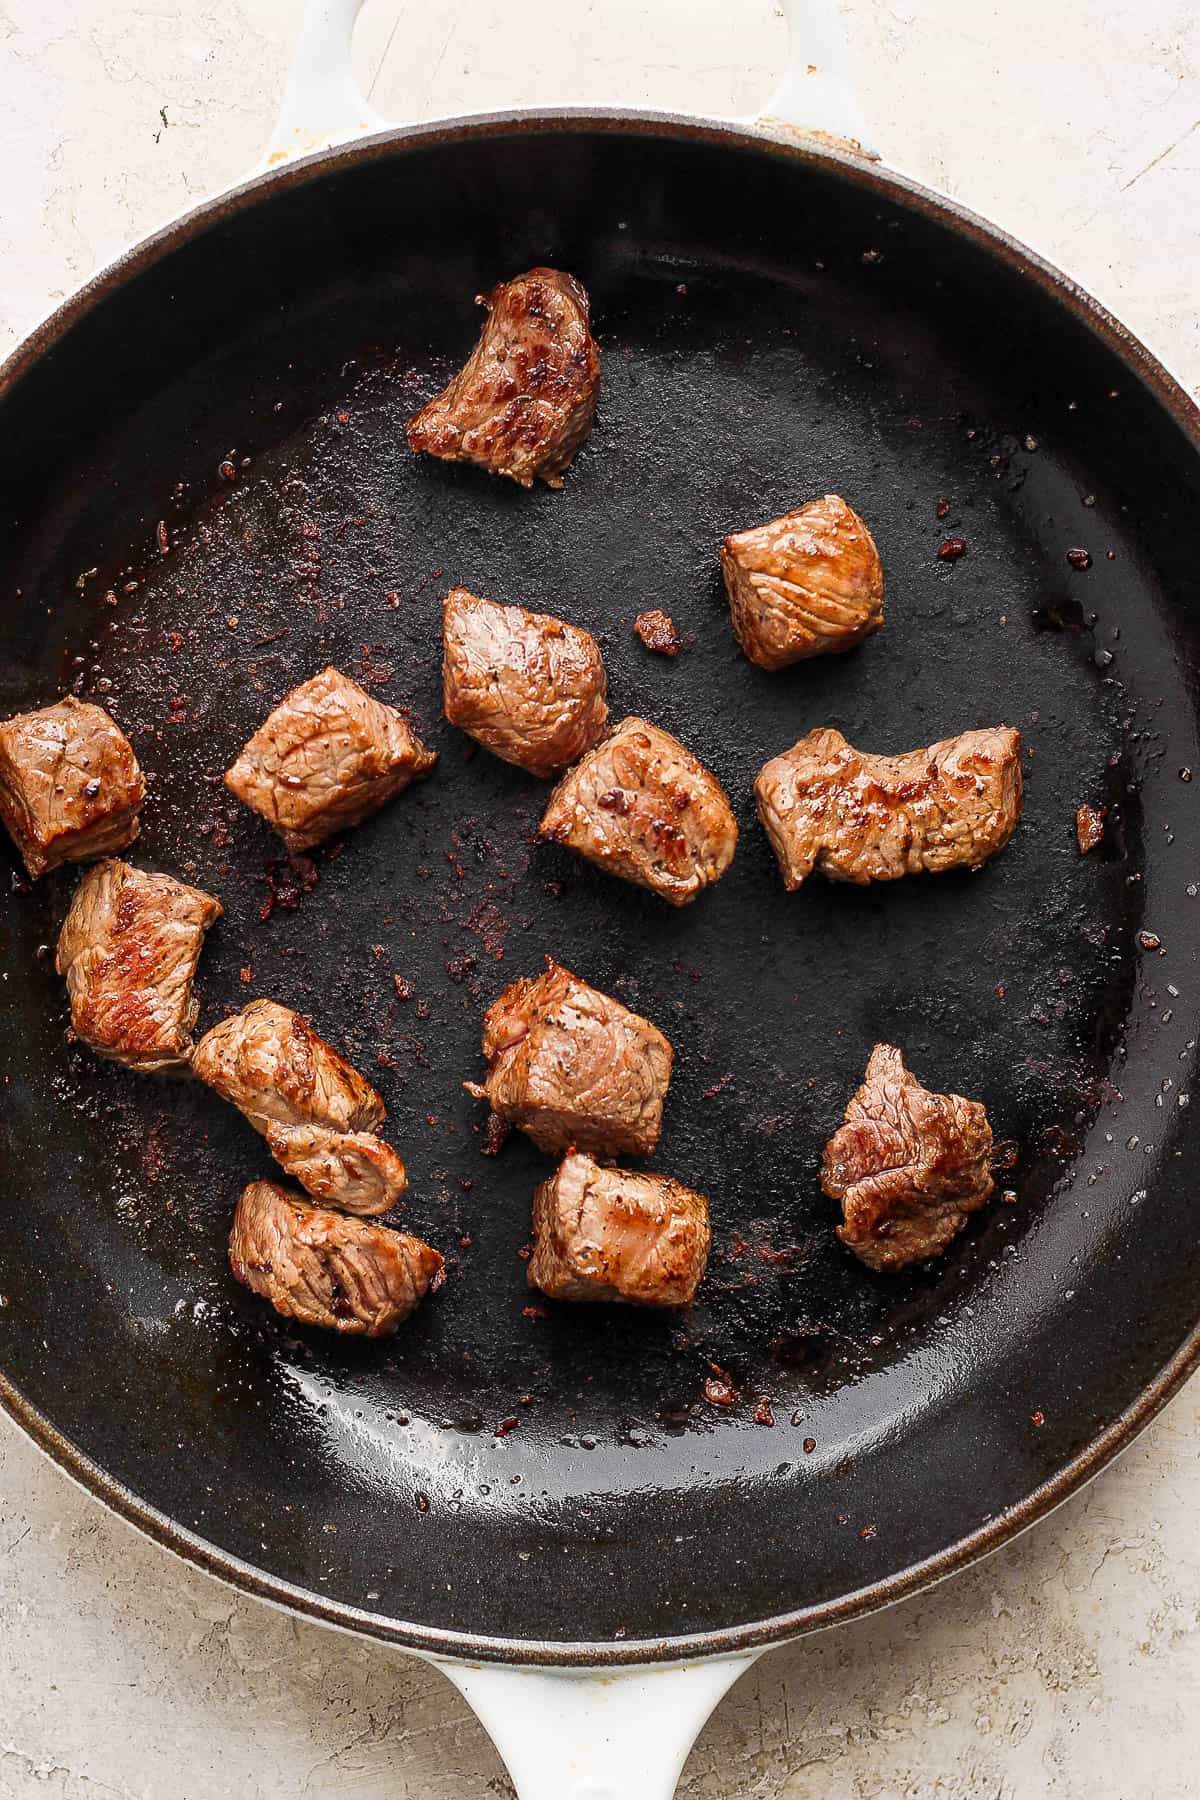 Some steak bites searing in a cast iron skillet.